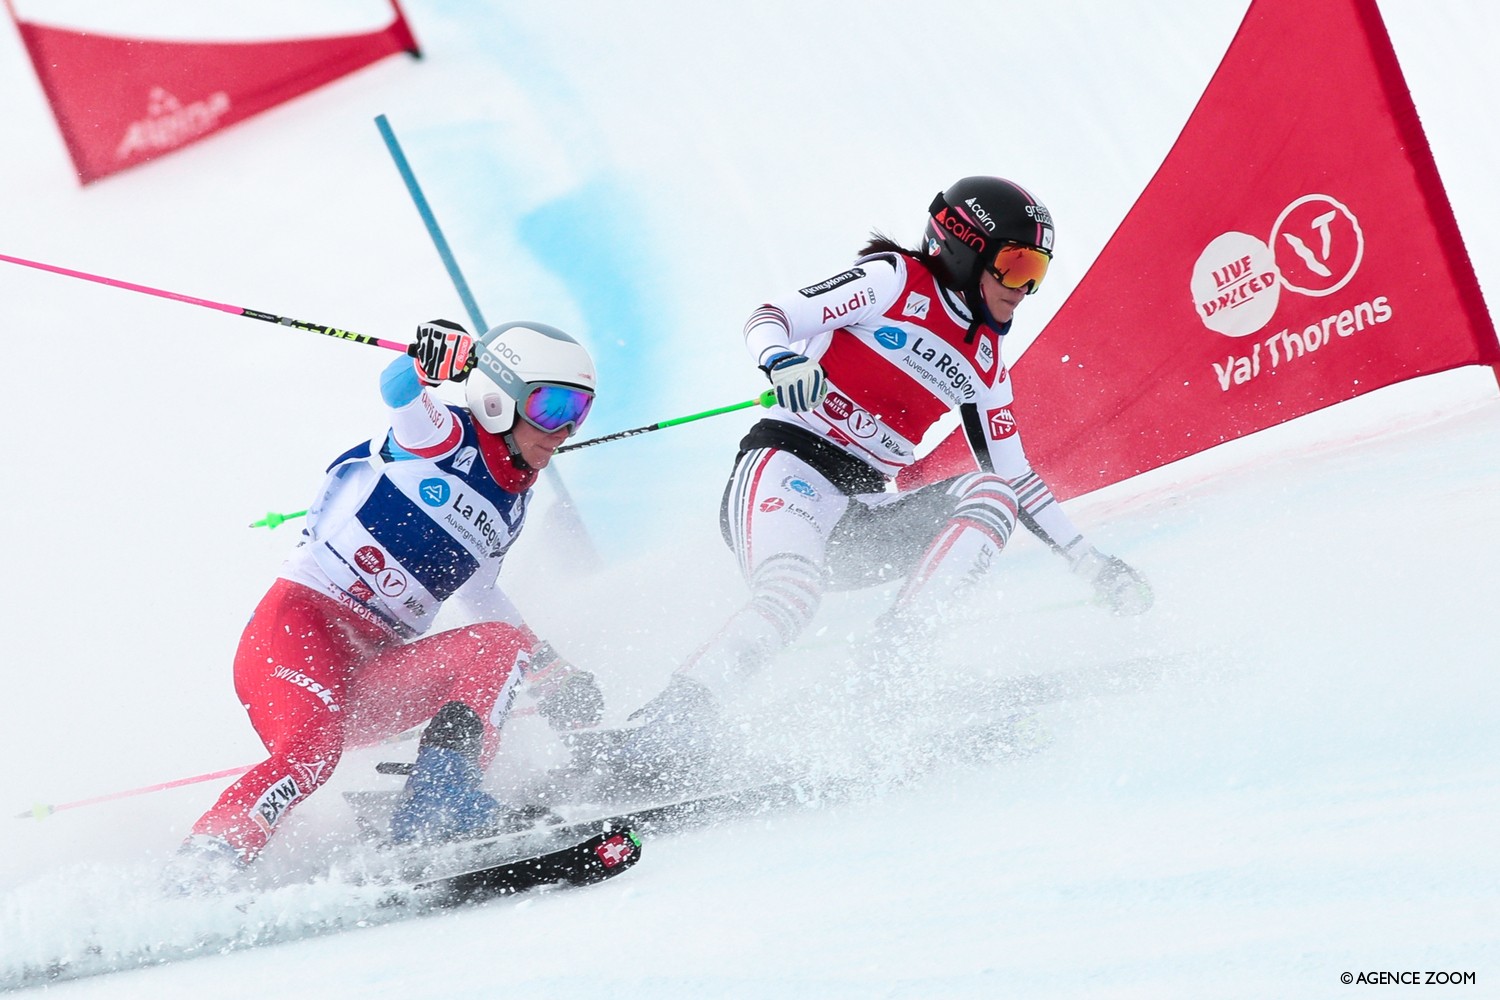 VAL THORENS, FRANCE - DECEMBER 21: Marielle Berger Sabbatel of France competes, Fanny Smith of Switzerland competes during the Audi FIS World Cup Ski Cross Men's and Women's Ski Cross on December 21, 2020 in Val Thorens, France. (Photo by Laurent Salino/Agence Zoom)